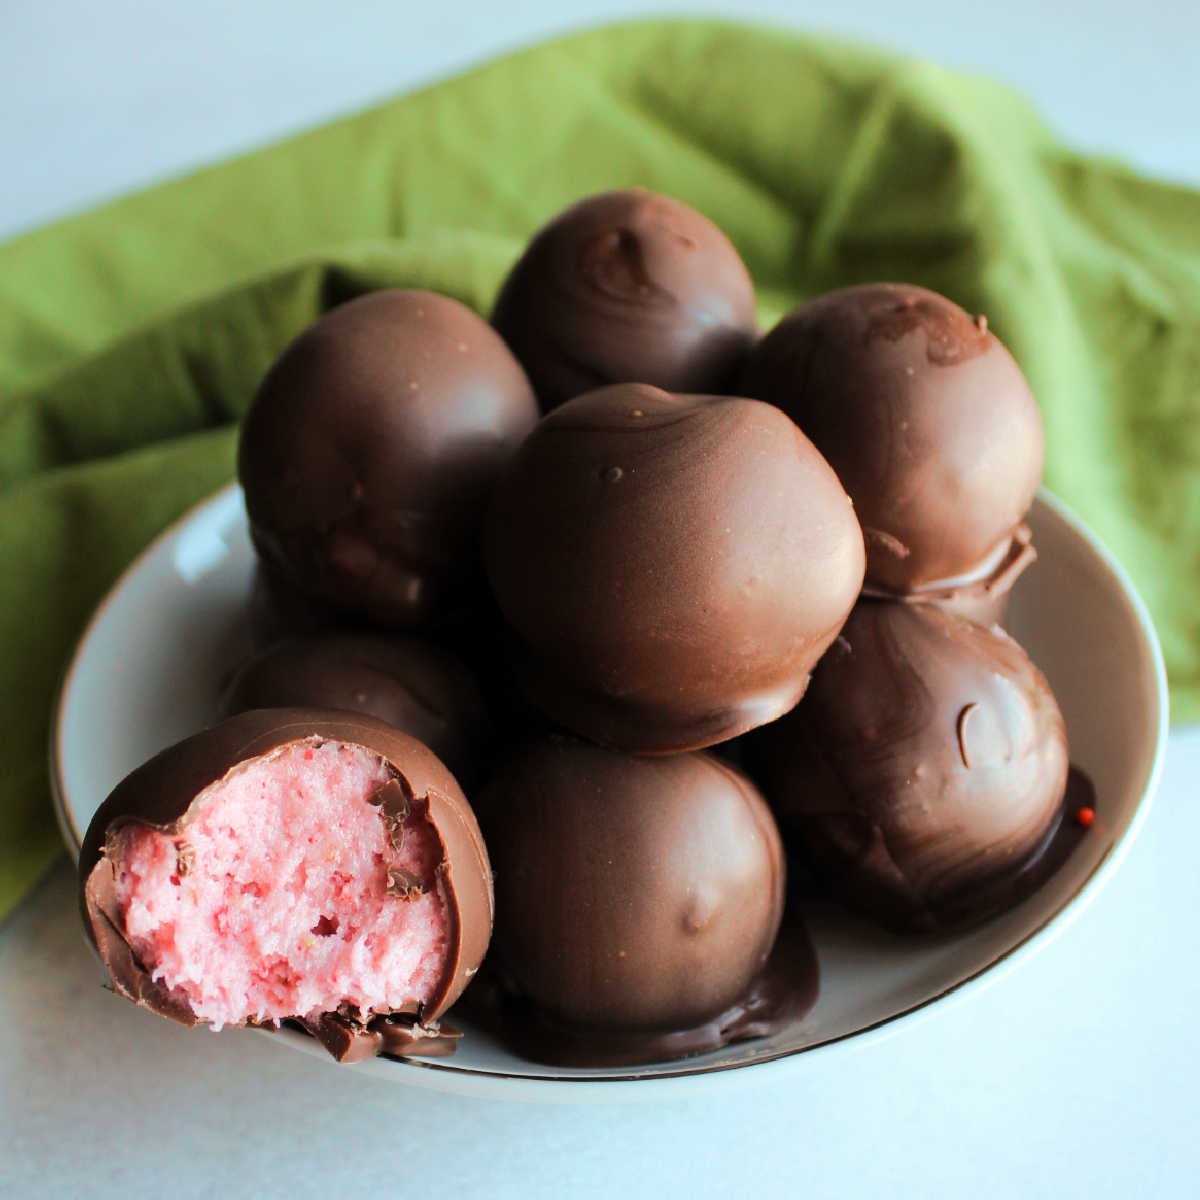 Bowlful of truffles, one with the pink strawberry buttercream center showing.